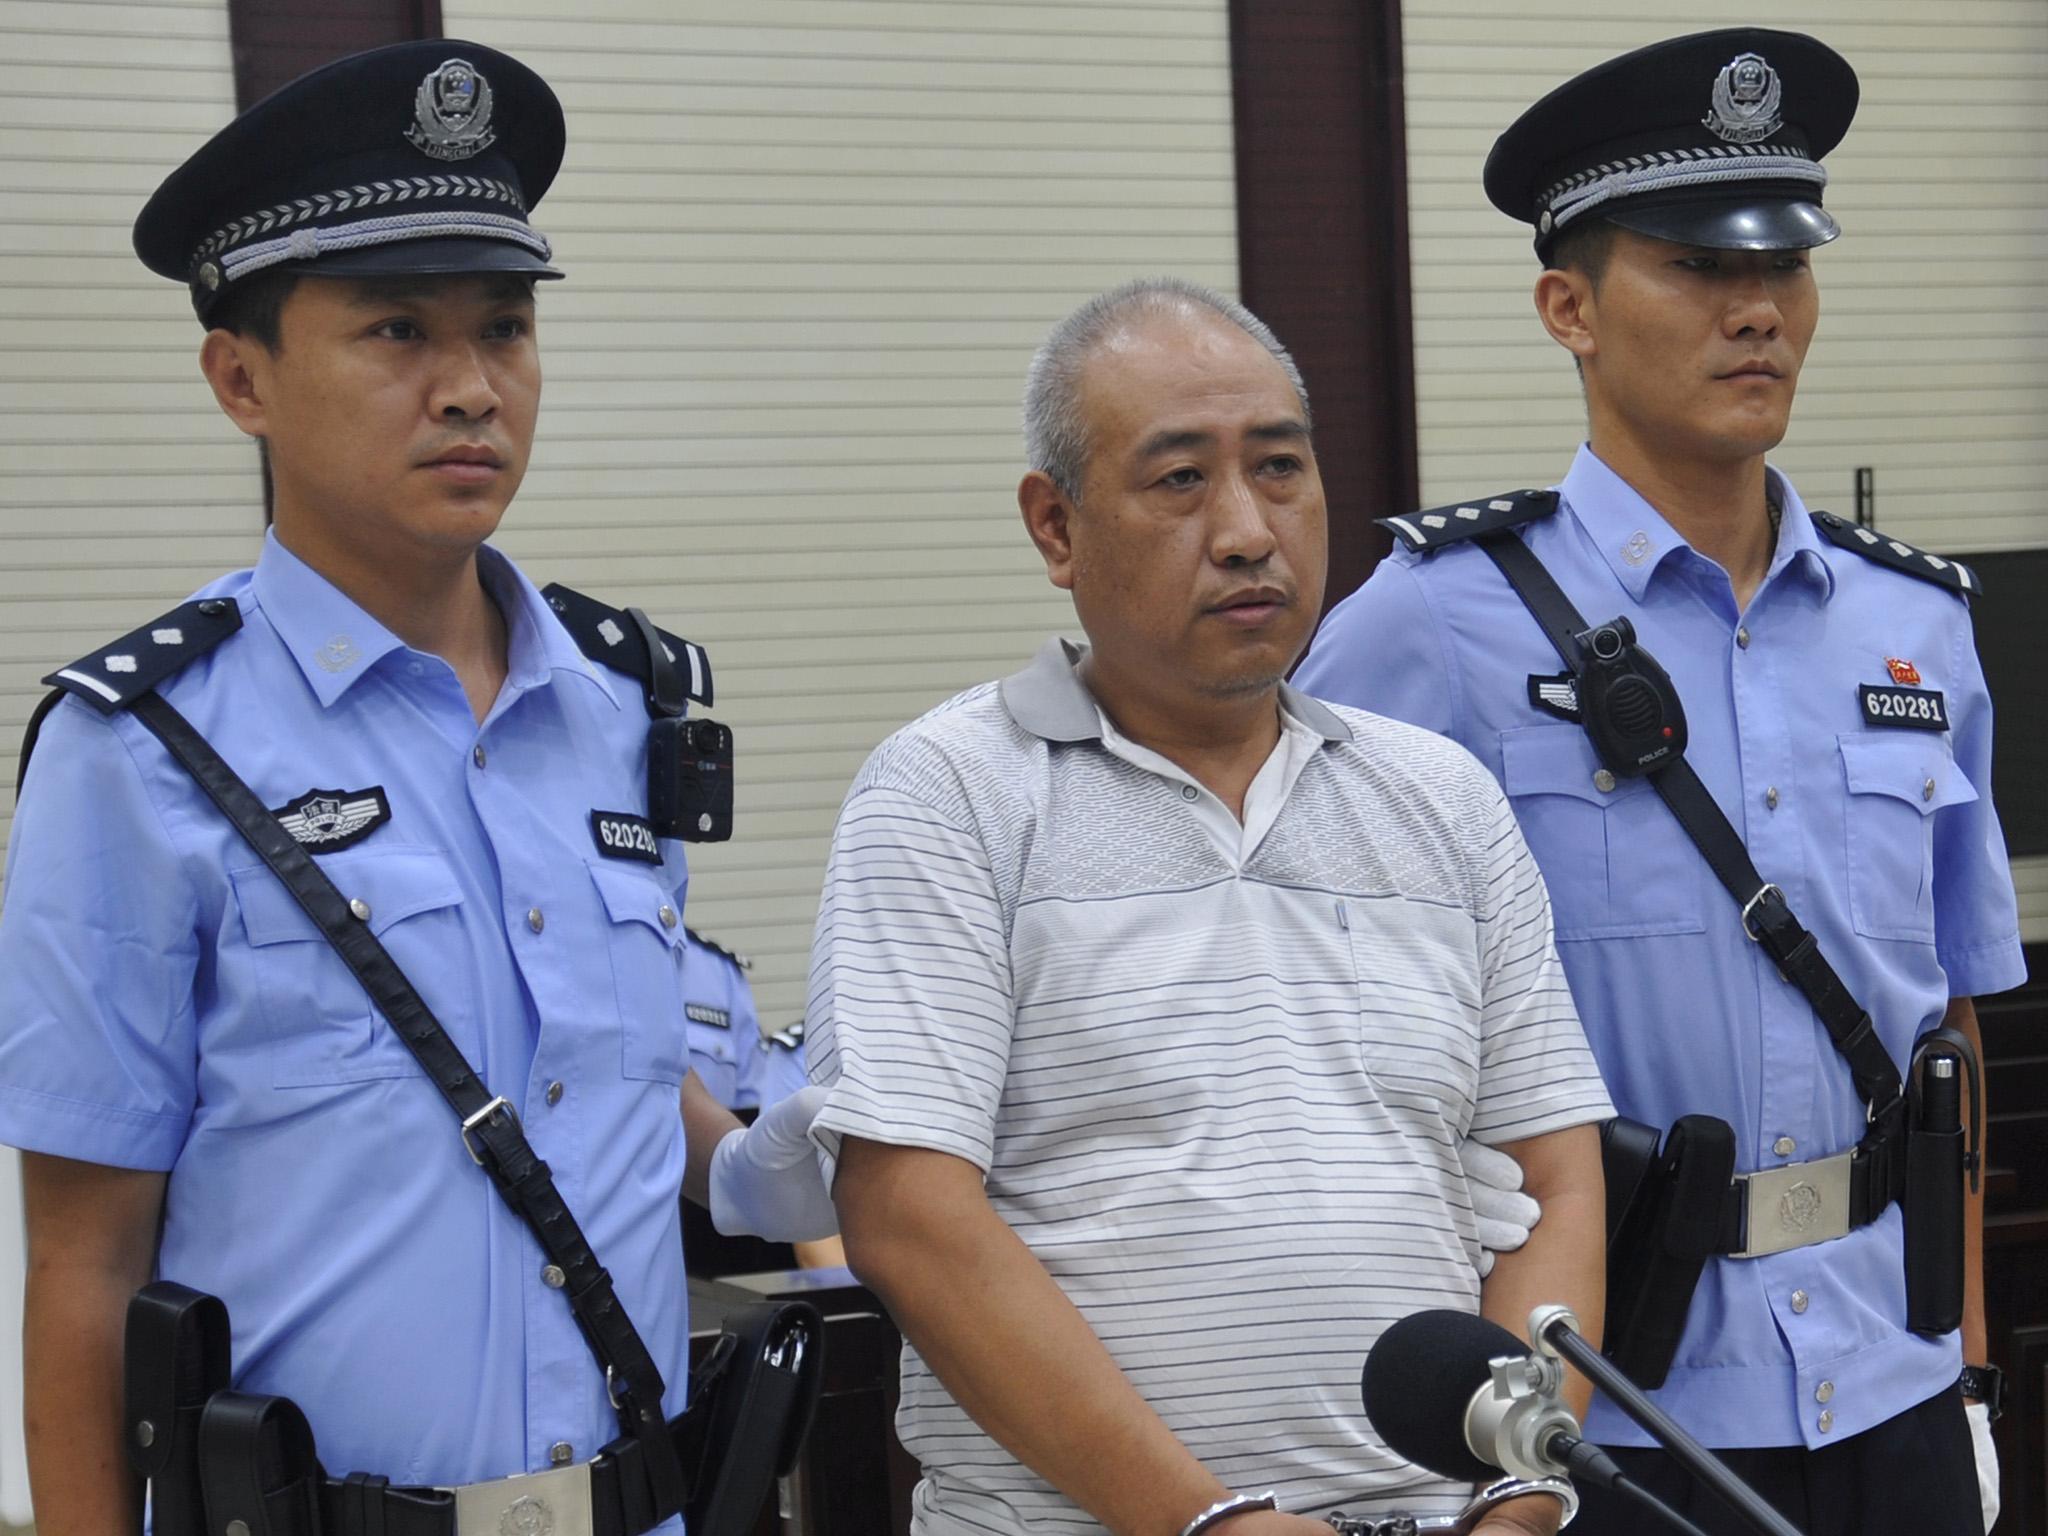 Serial killer Gao Chengyong pictured at his trial in Baiyin, Gansu province, China, in July 2017